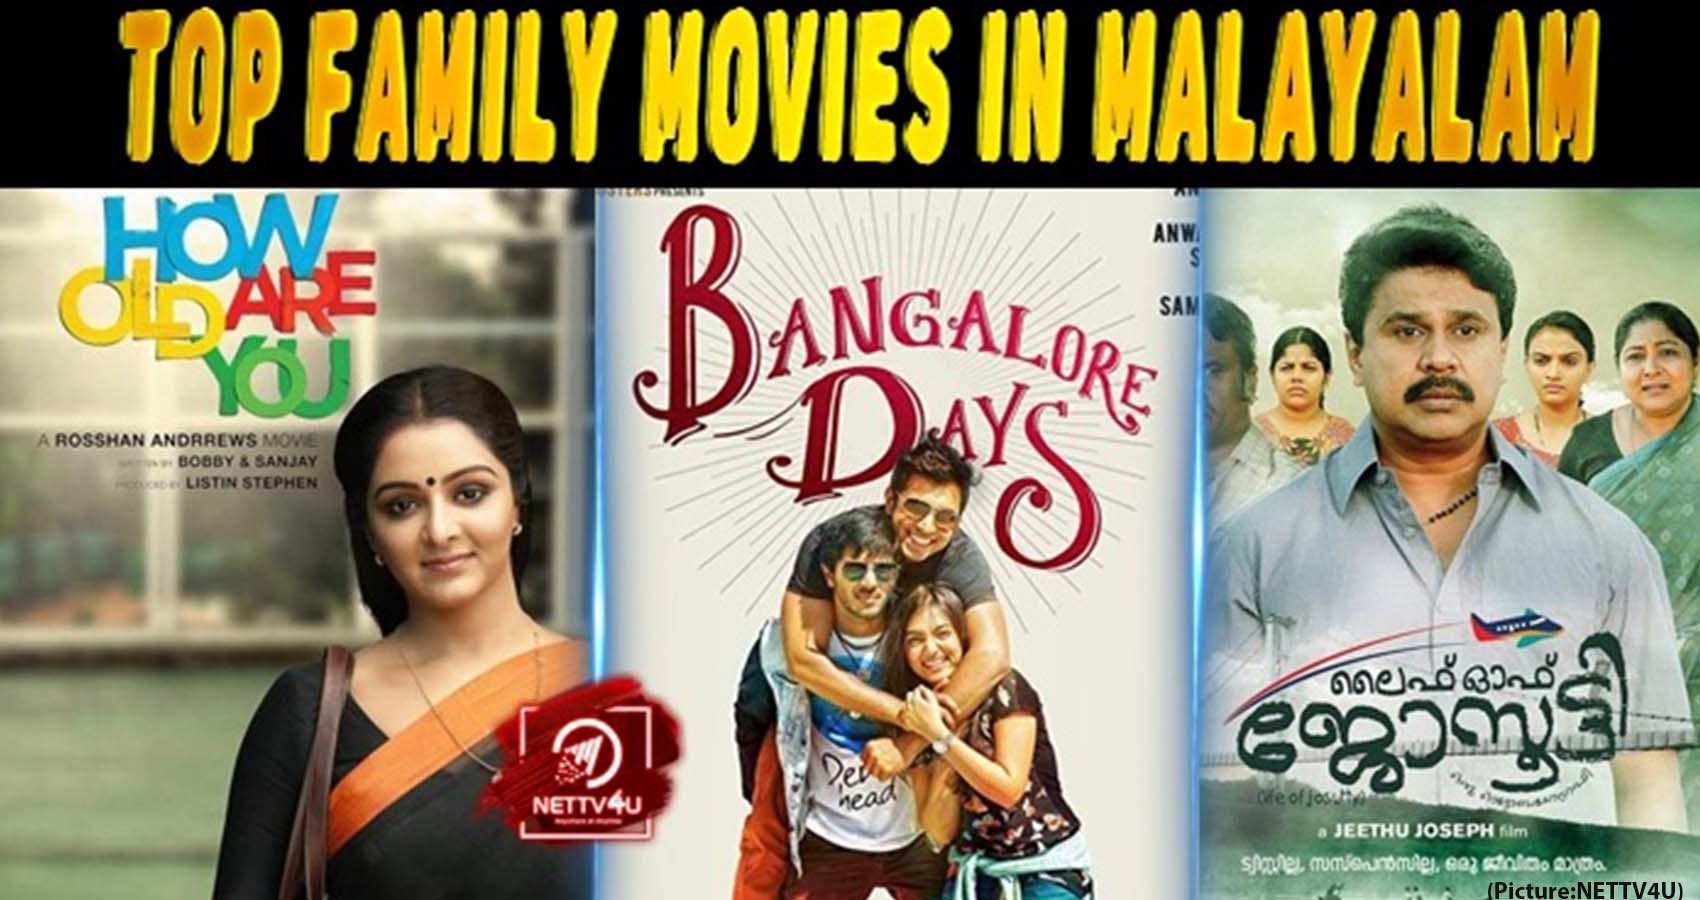 Malayalam Cinema Known For Family-Centred Stories